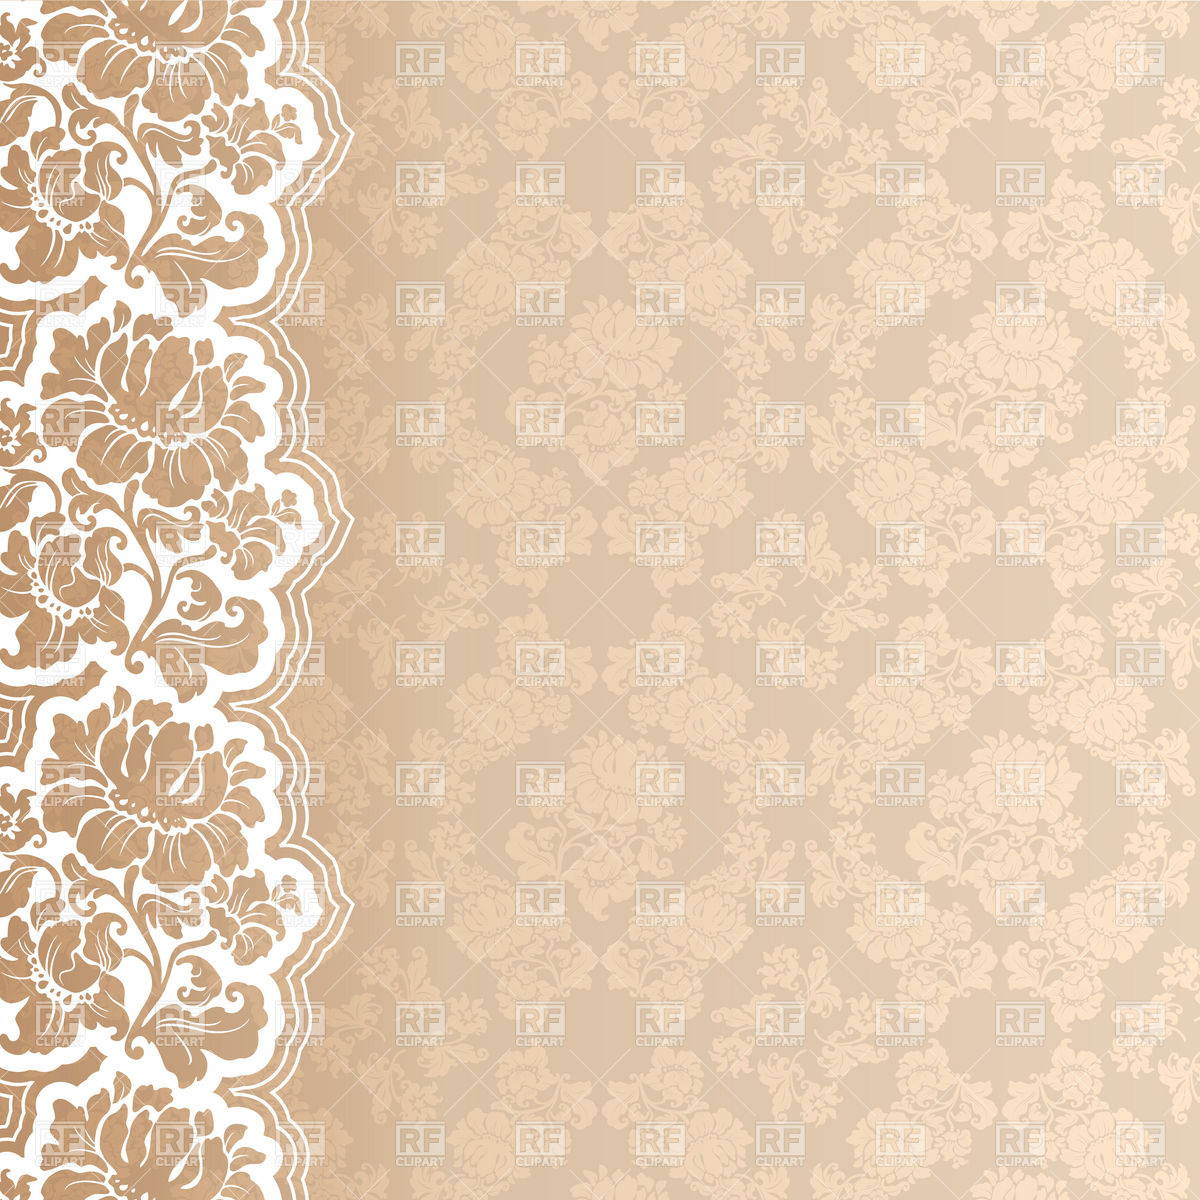 Pearls And Lace Clipart Free.